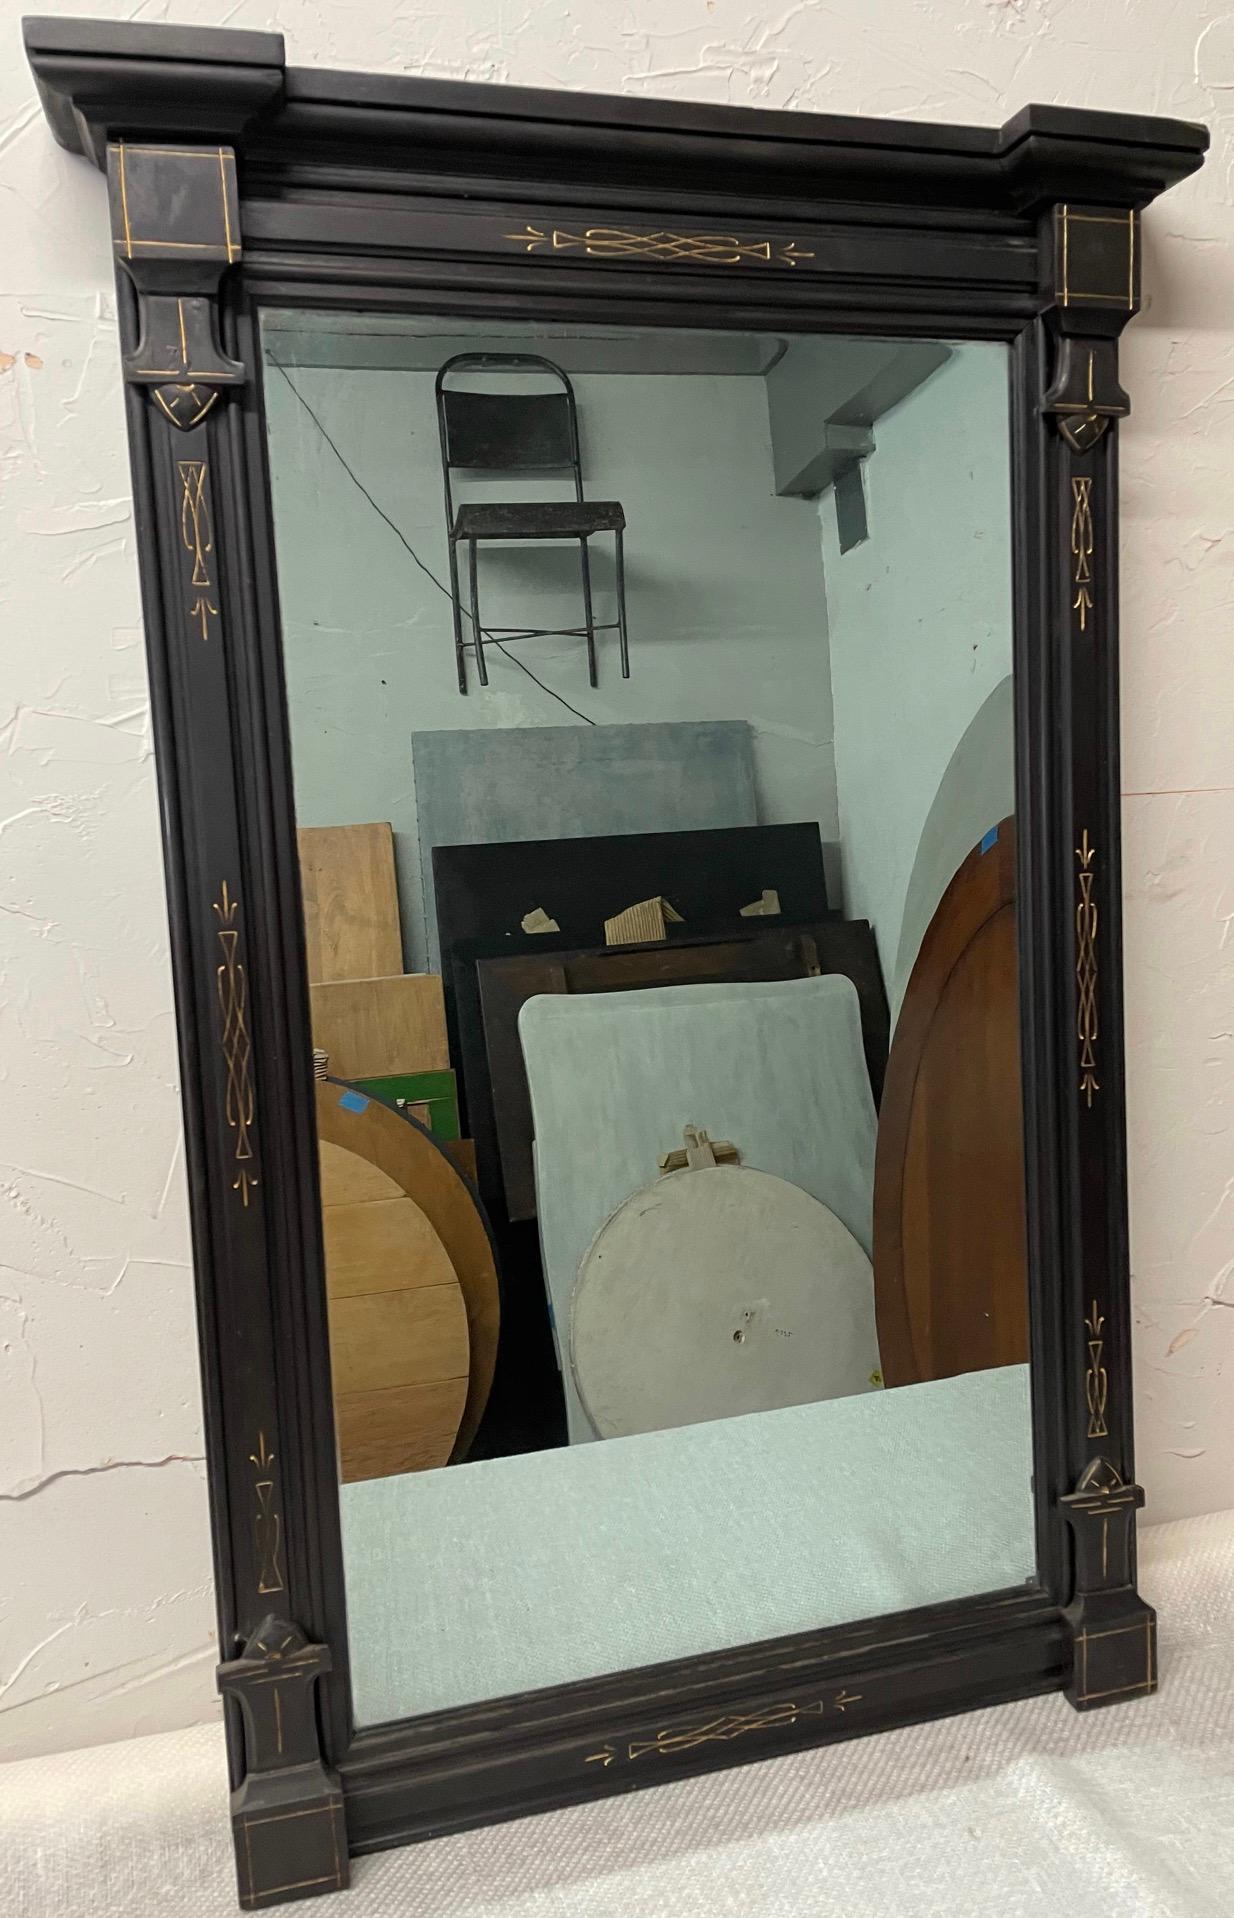 Antique East Lake style victorian black painted hand carved wall mirror with gold accented carved detail. Newly refinished condition. Hardware included.
Pier mirror, console mirror, mantle mirror. Federal style.